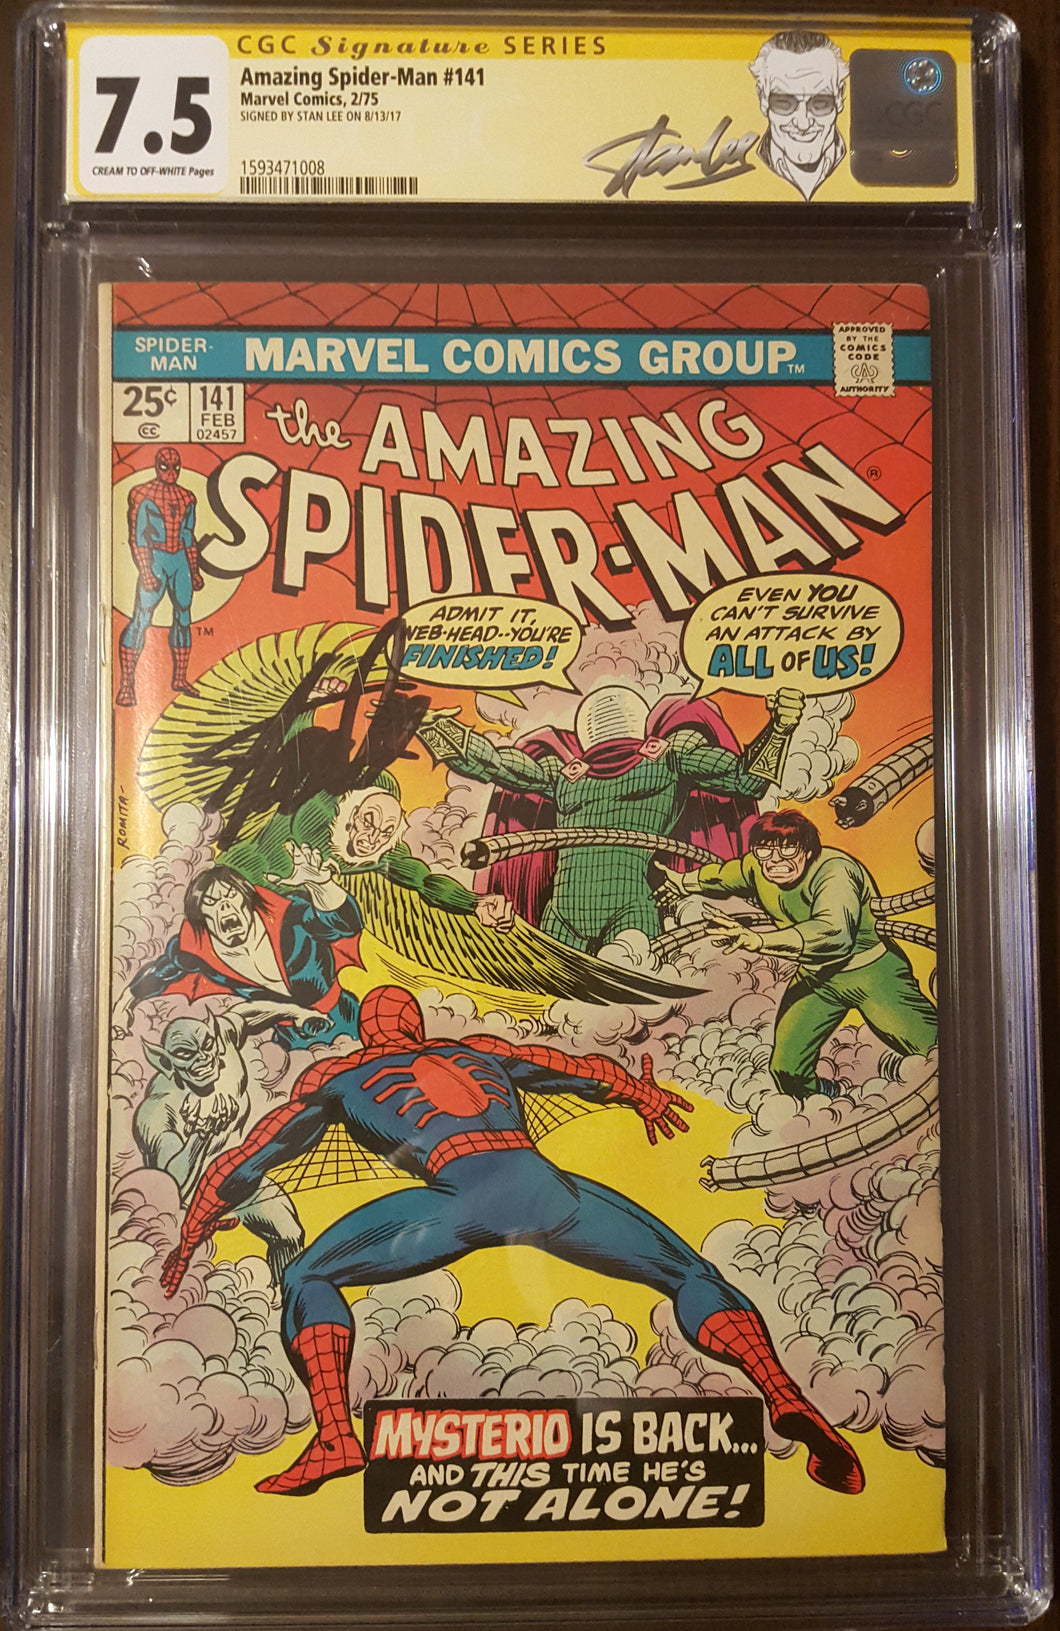 Amazing Spider-Man (1963 1st Series) #141 Signed by STAN LEE